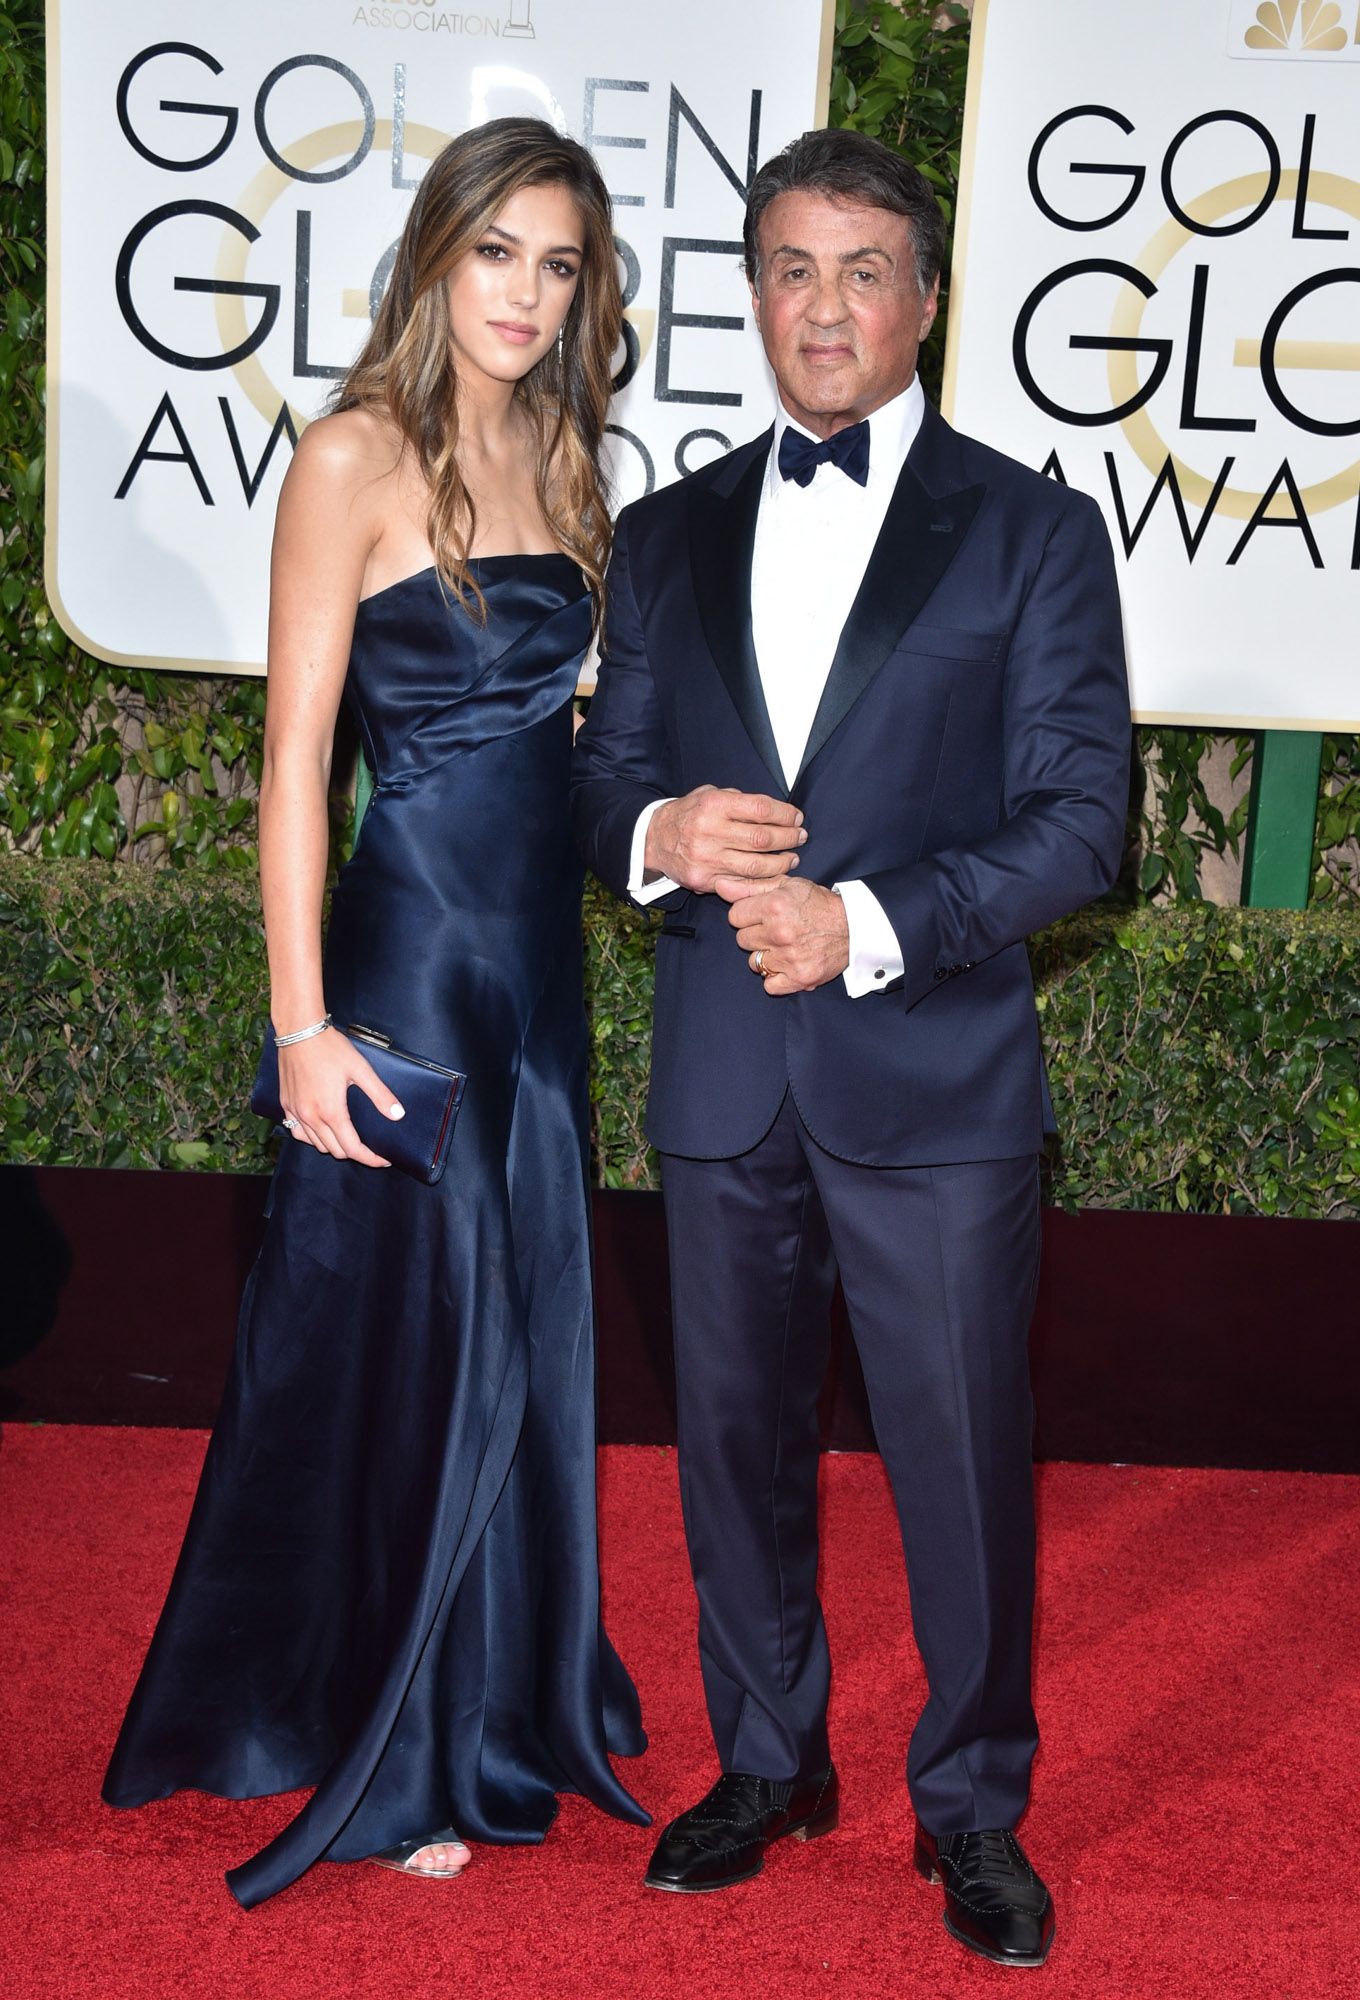 Scarlet Stallone and Sylvester Stallone at the 73rd Annual Golden Globe Awards held at The Beverly Hilton Hotel on January 10, 2016 in Beverly Hills, California. | Photo: Getty Images